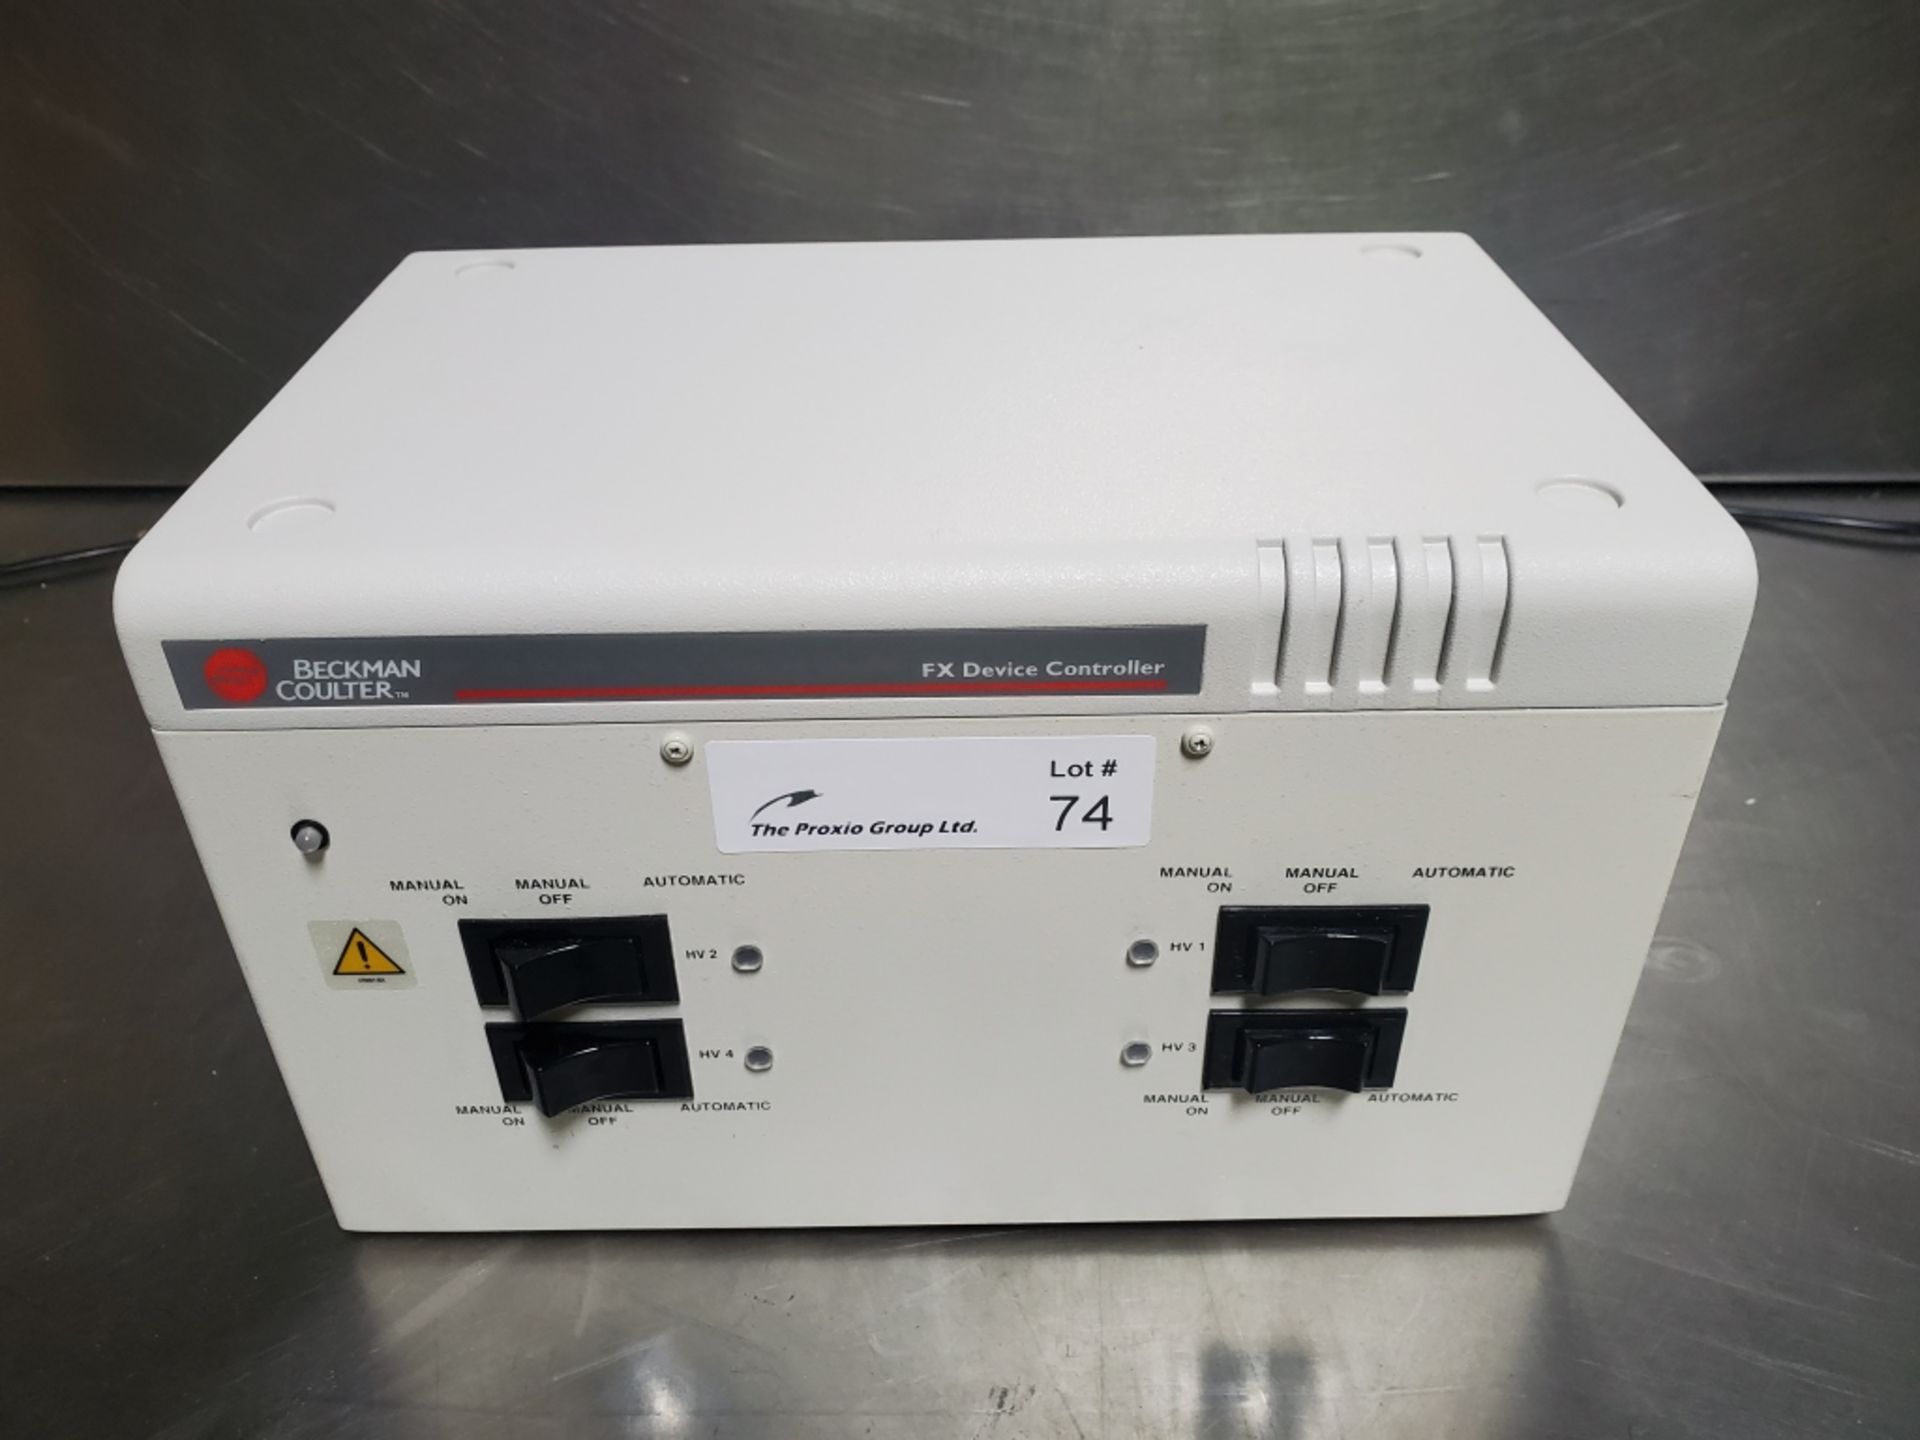 Beckman Coulter Biomex FX Series Device Controller